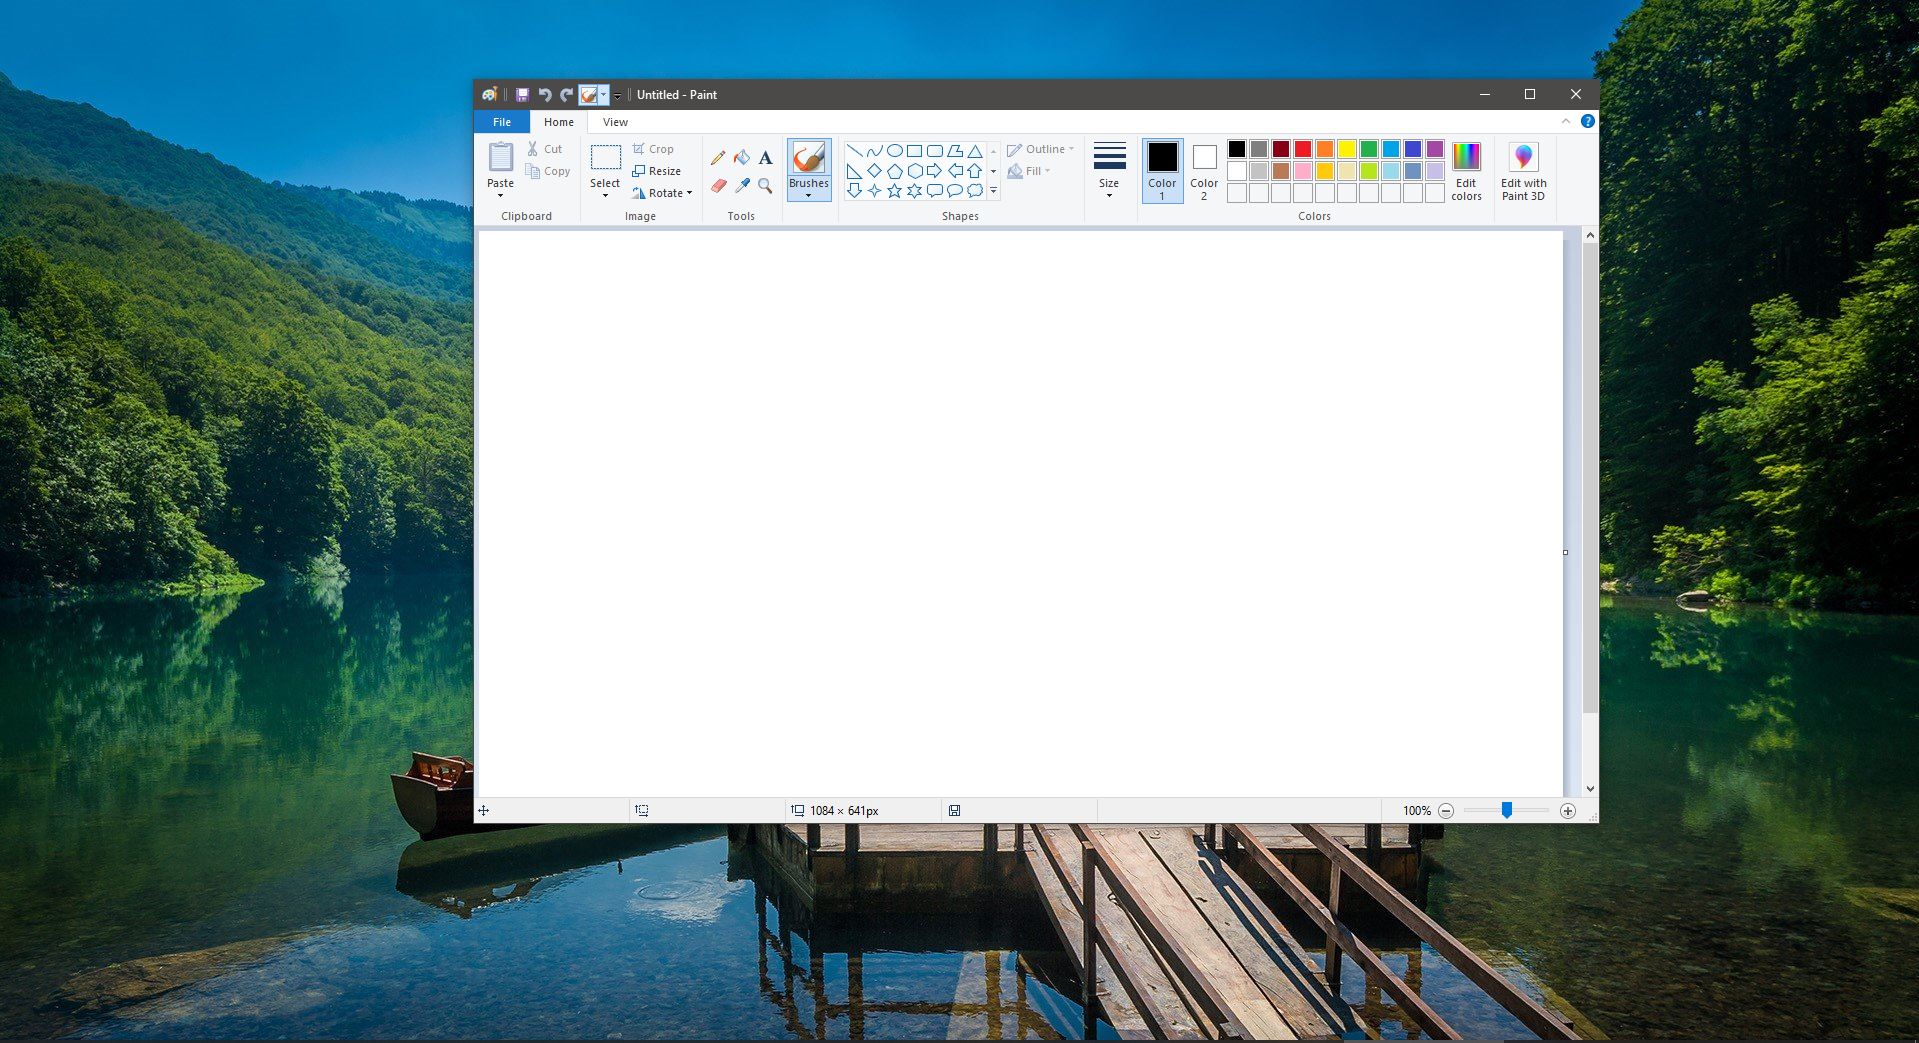 How to Reset Microsoft Paint Settings in Windows 10?